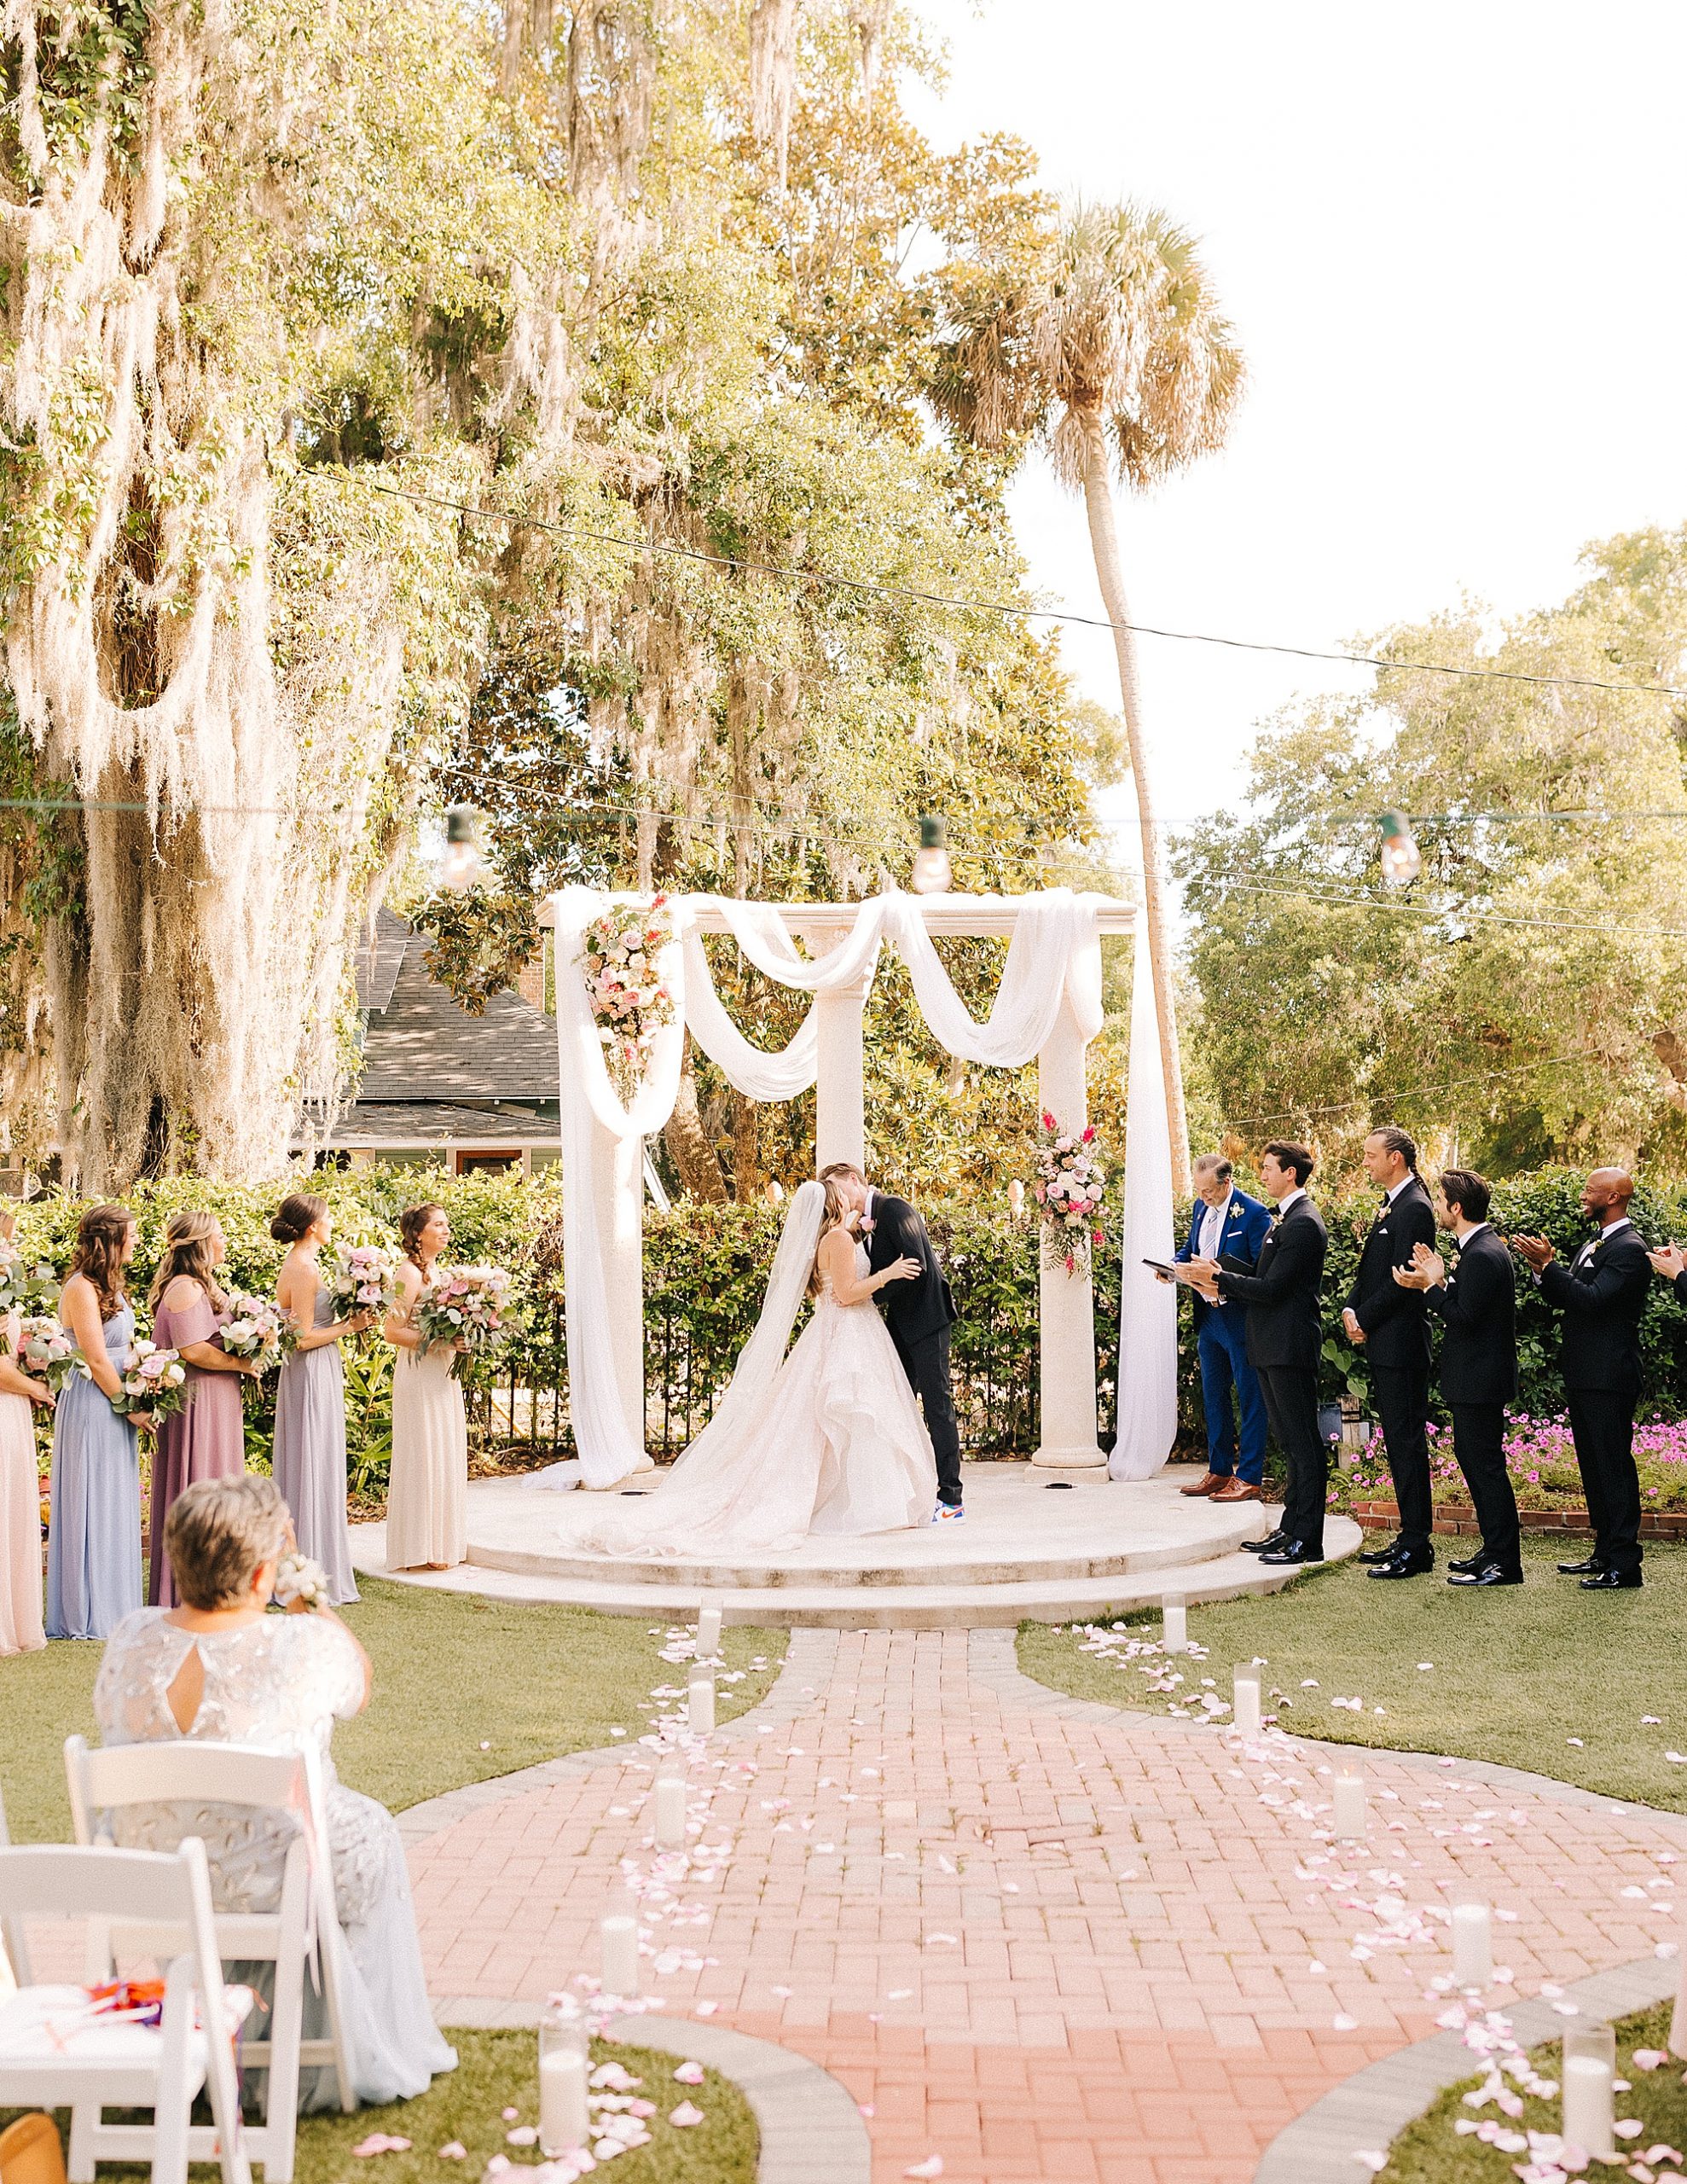 bride and groom kiss under arbor with draped white cloth